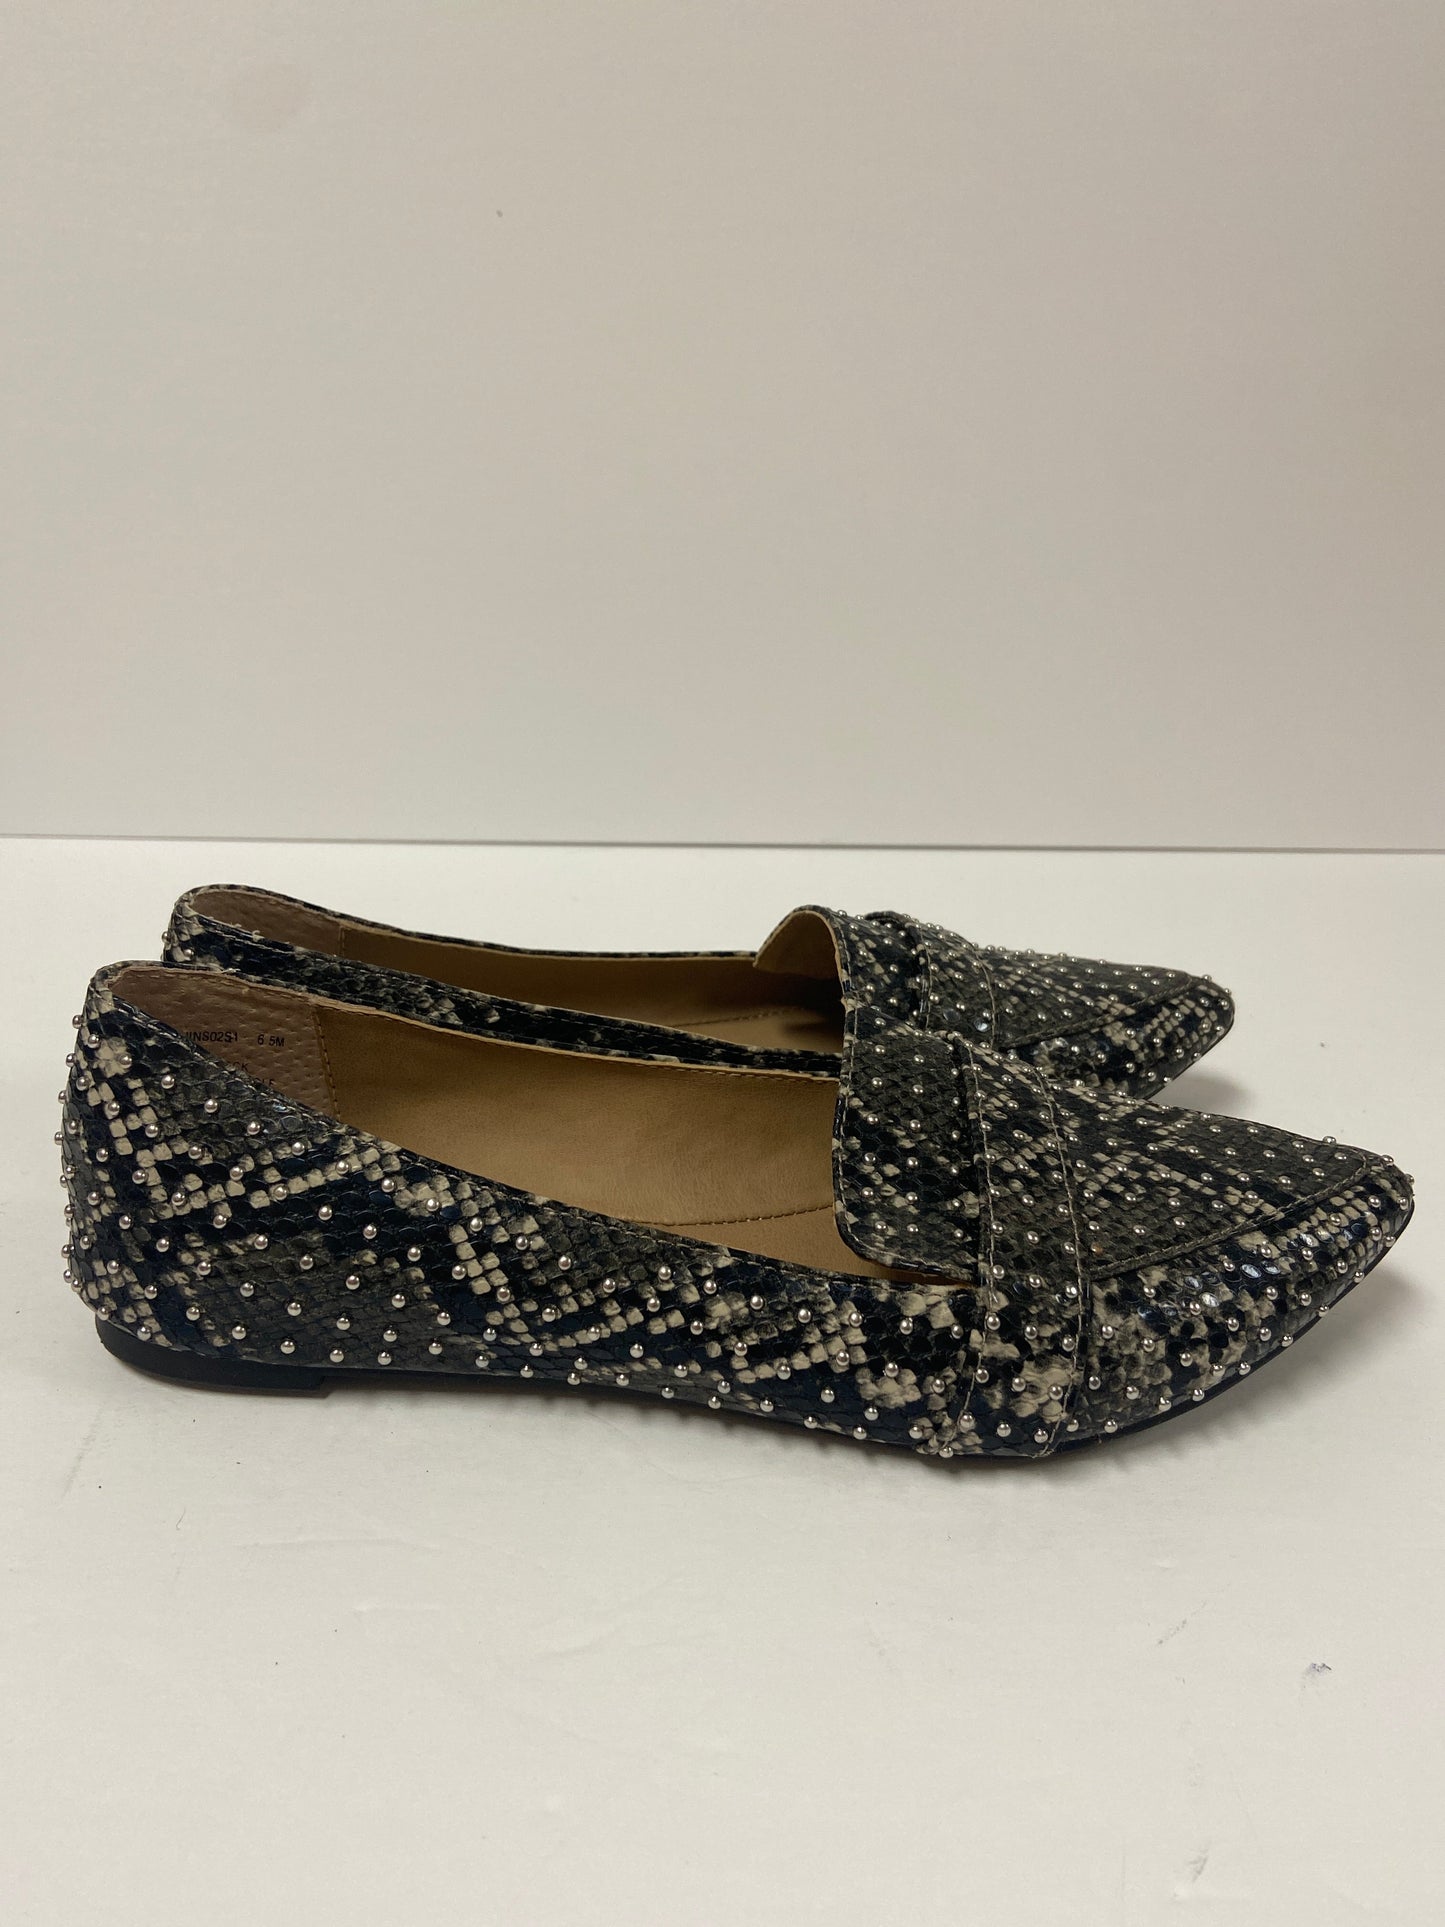 Shoes Flats Ballet By Steve Madden  Size: 6.5